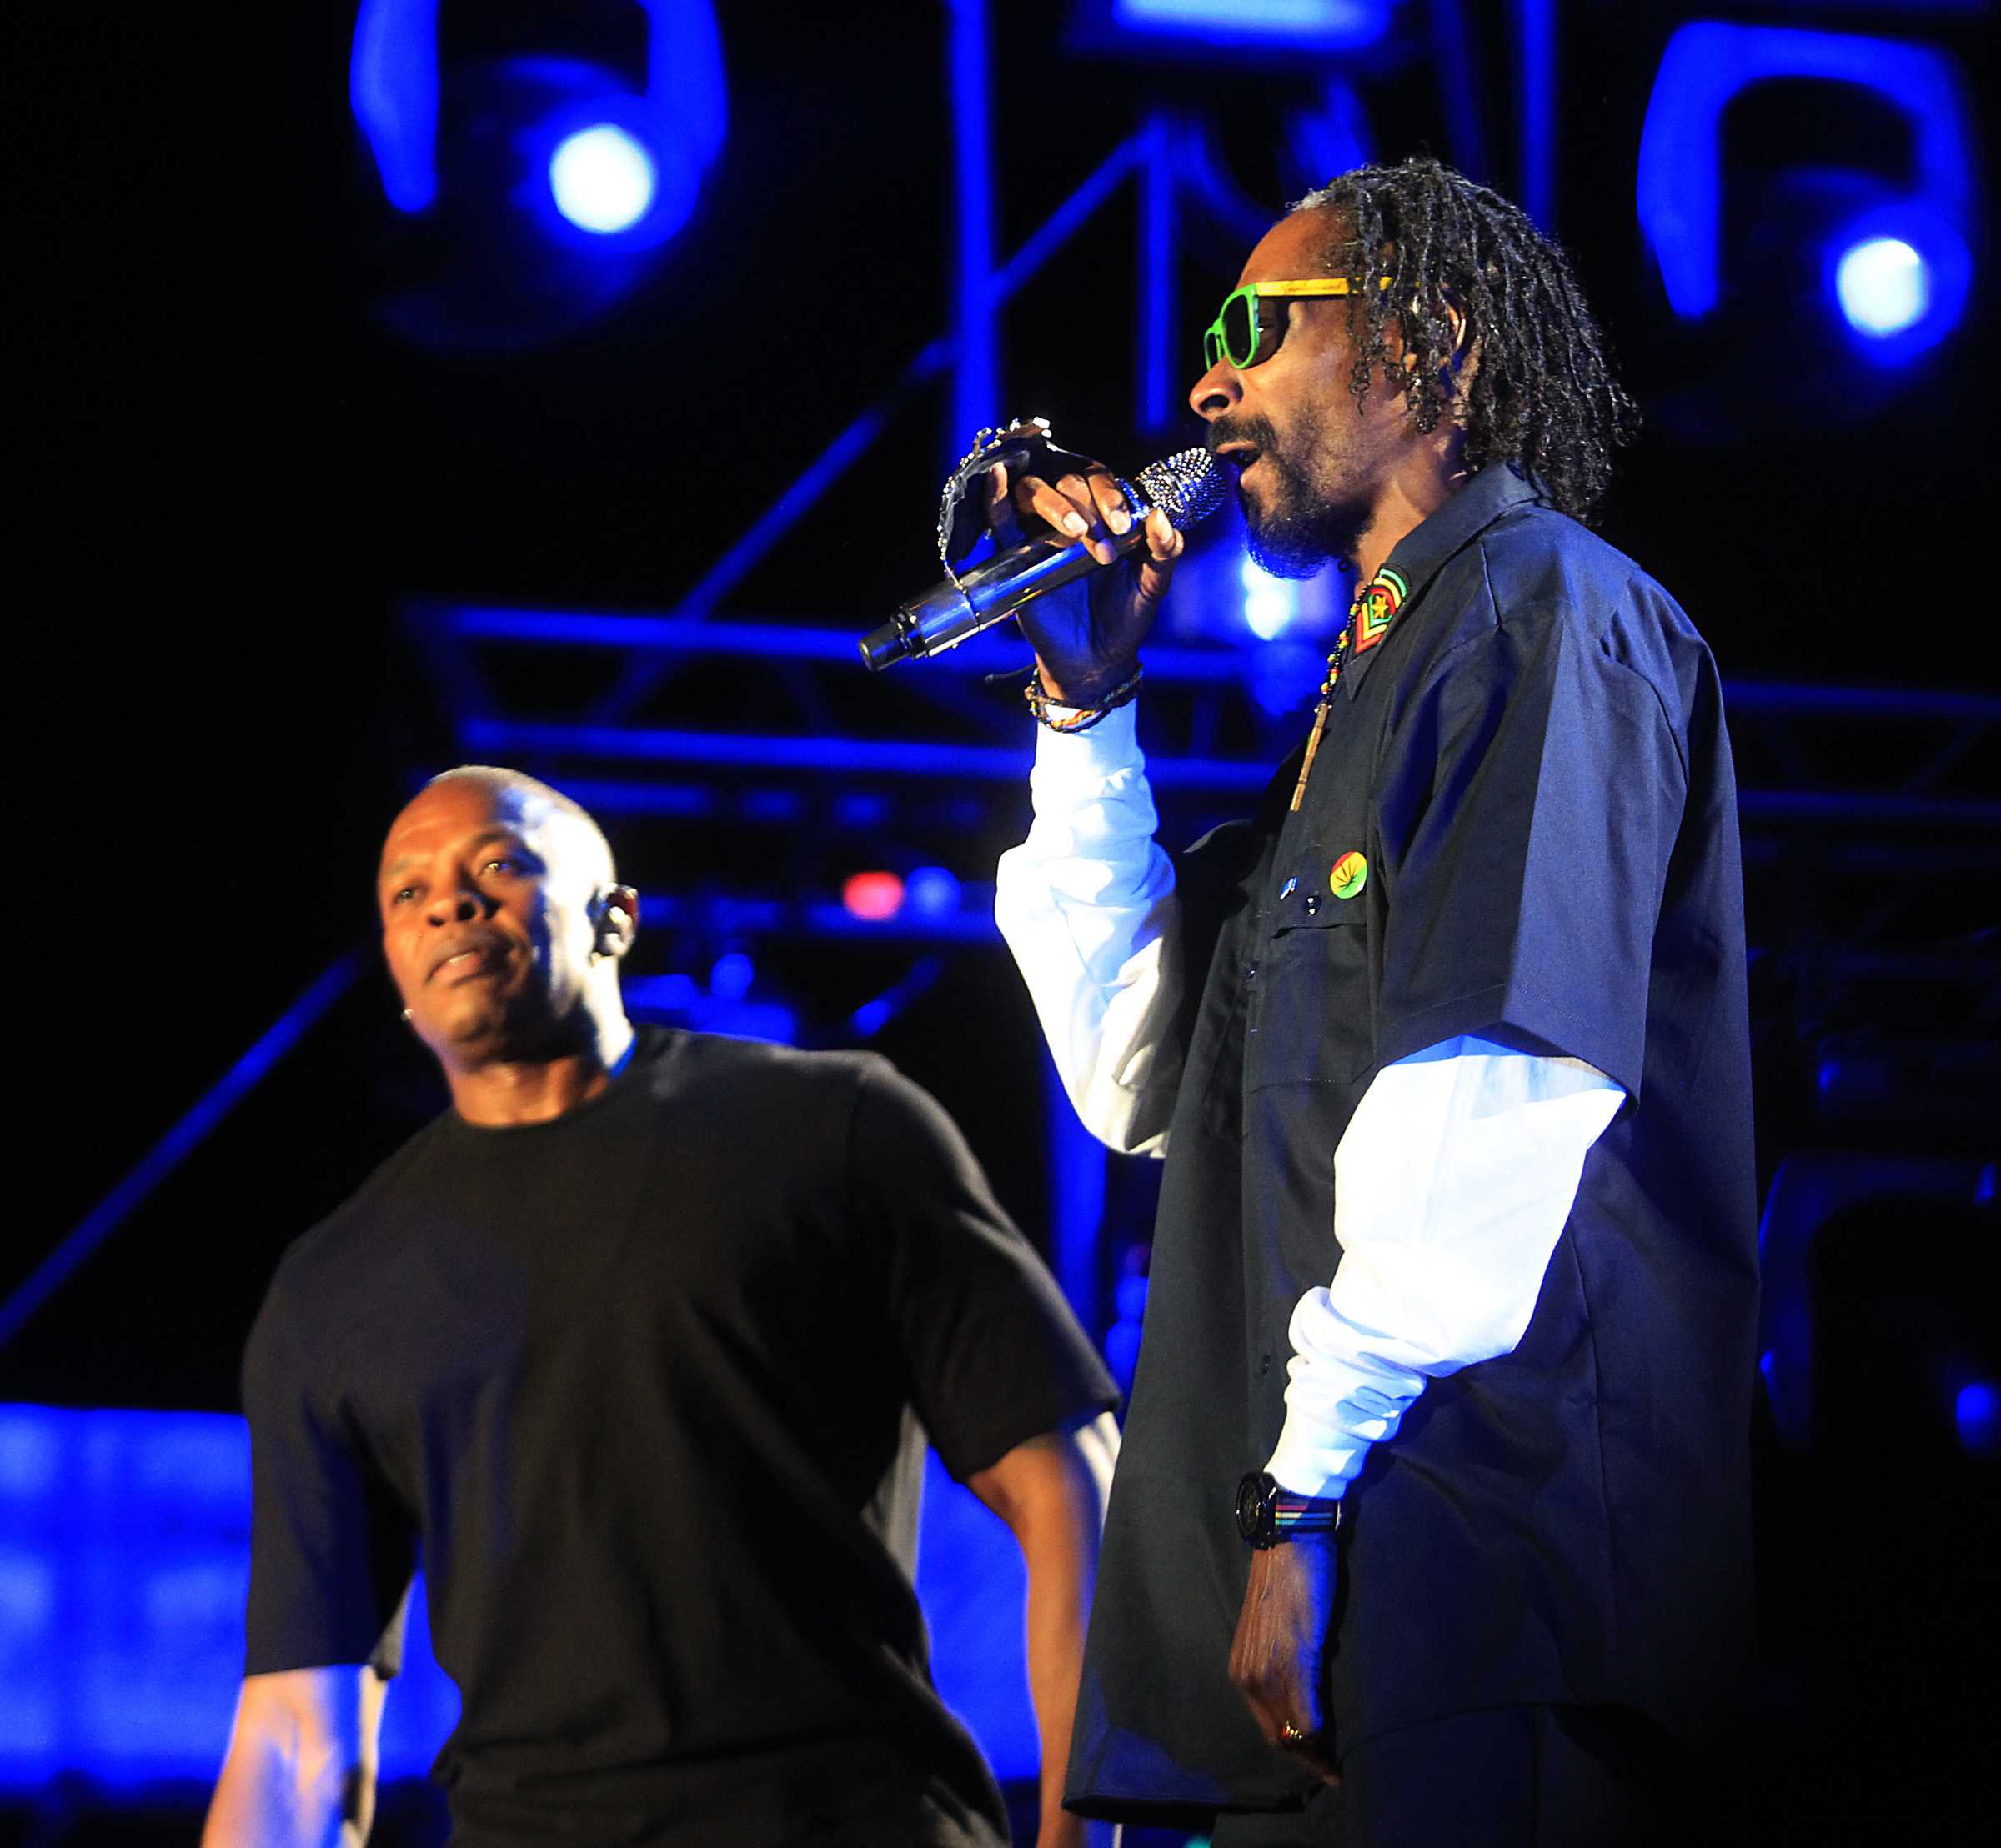 Snoop Dogg and Dr. Dre pictured performing at coachella